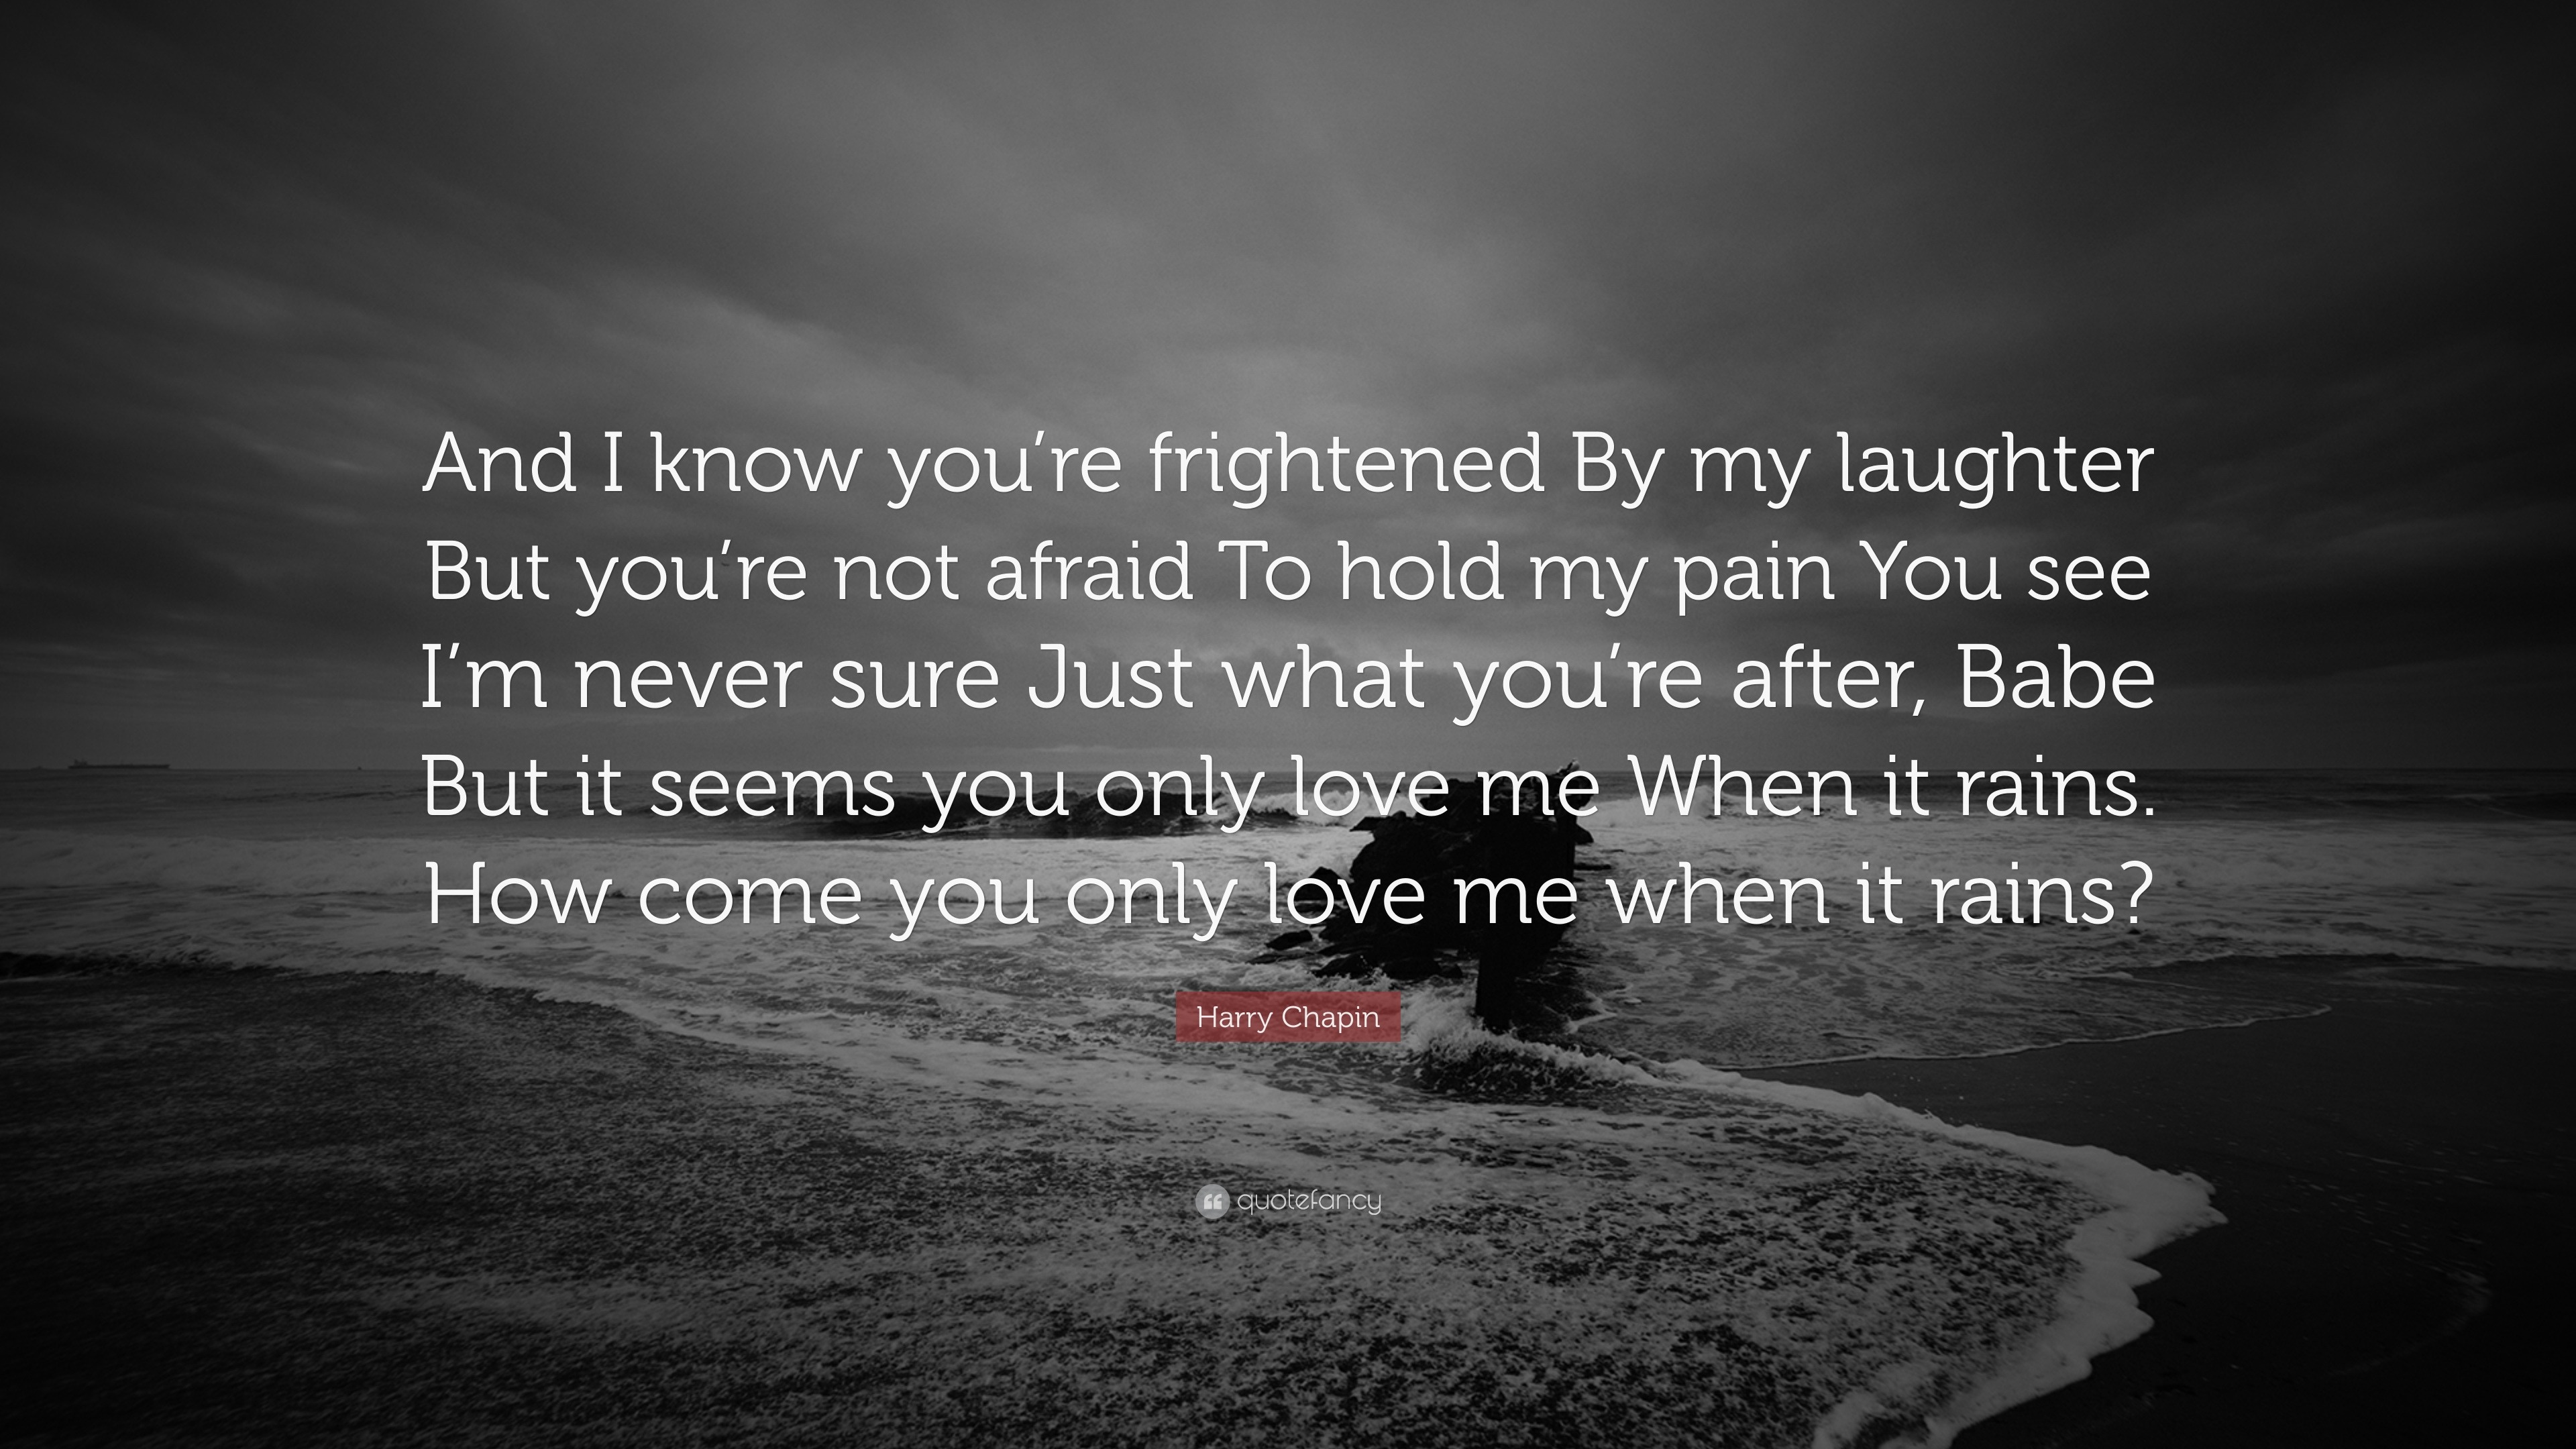 Harry Chapin Quote: “And I know you’re frightened By my laughter But ...